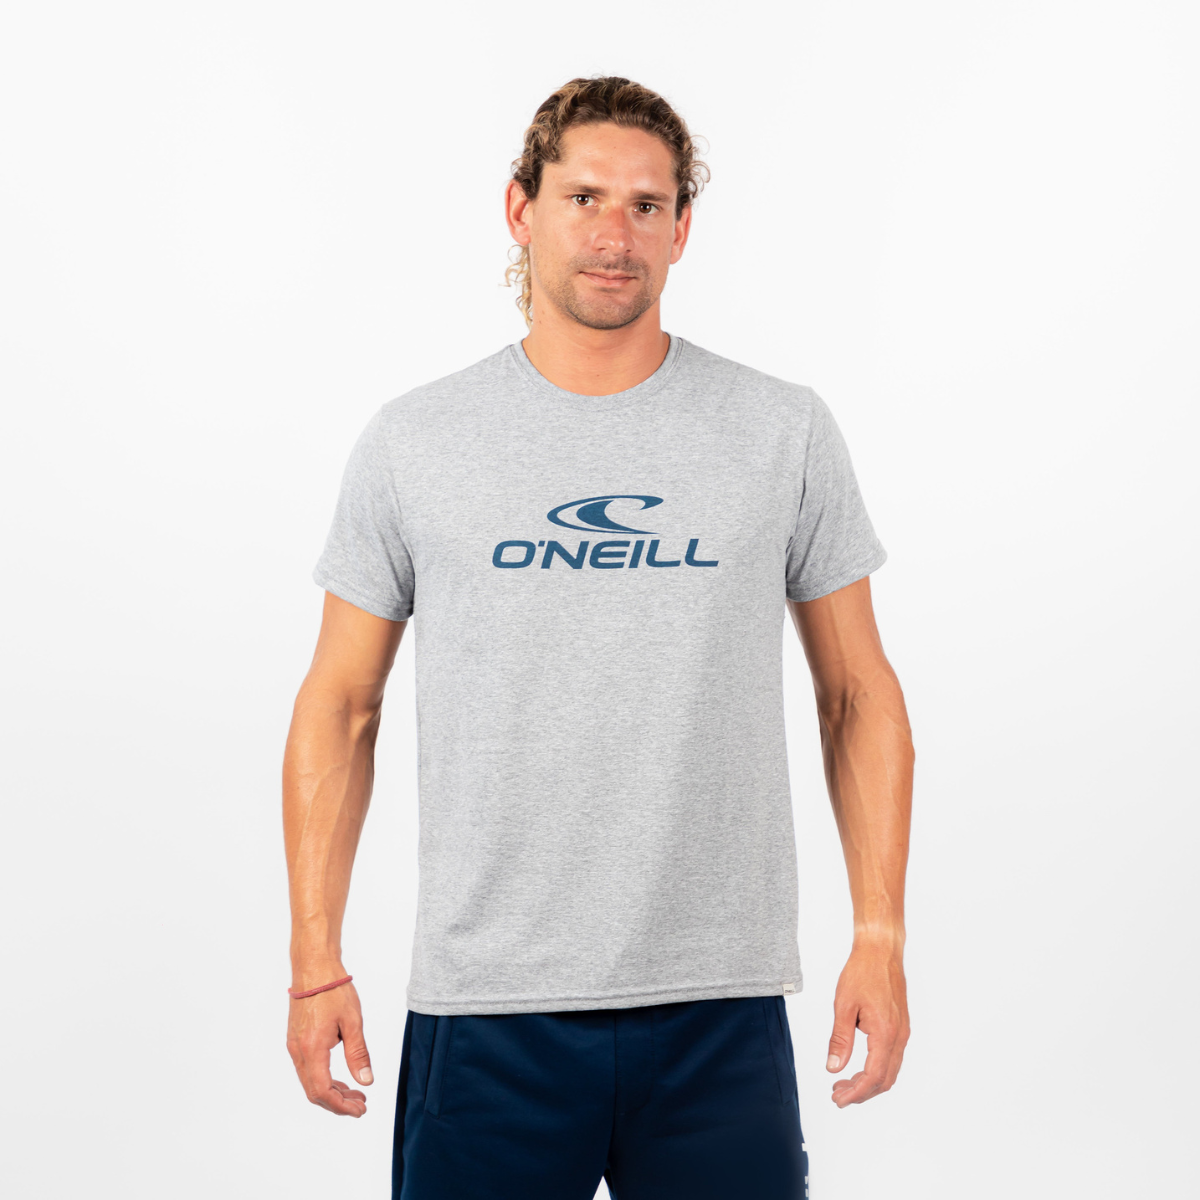 POLO M/C - LM O´NEILL T-SHIRT - SILVER MELEE - 3X119